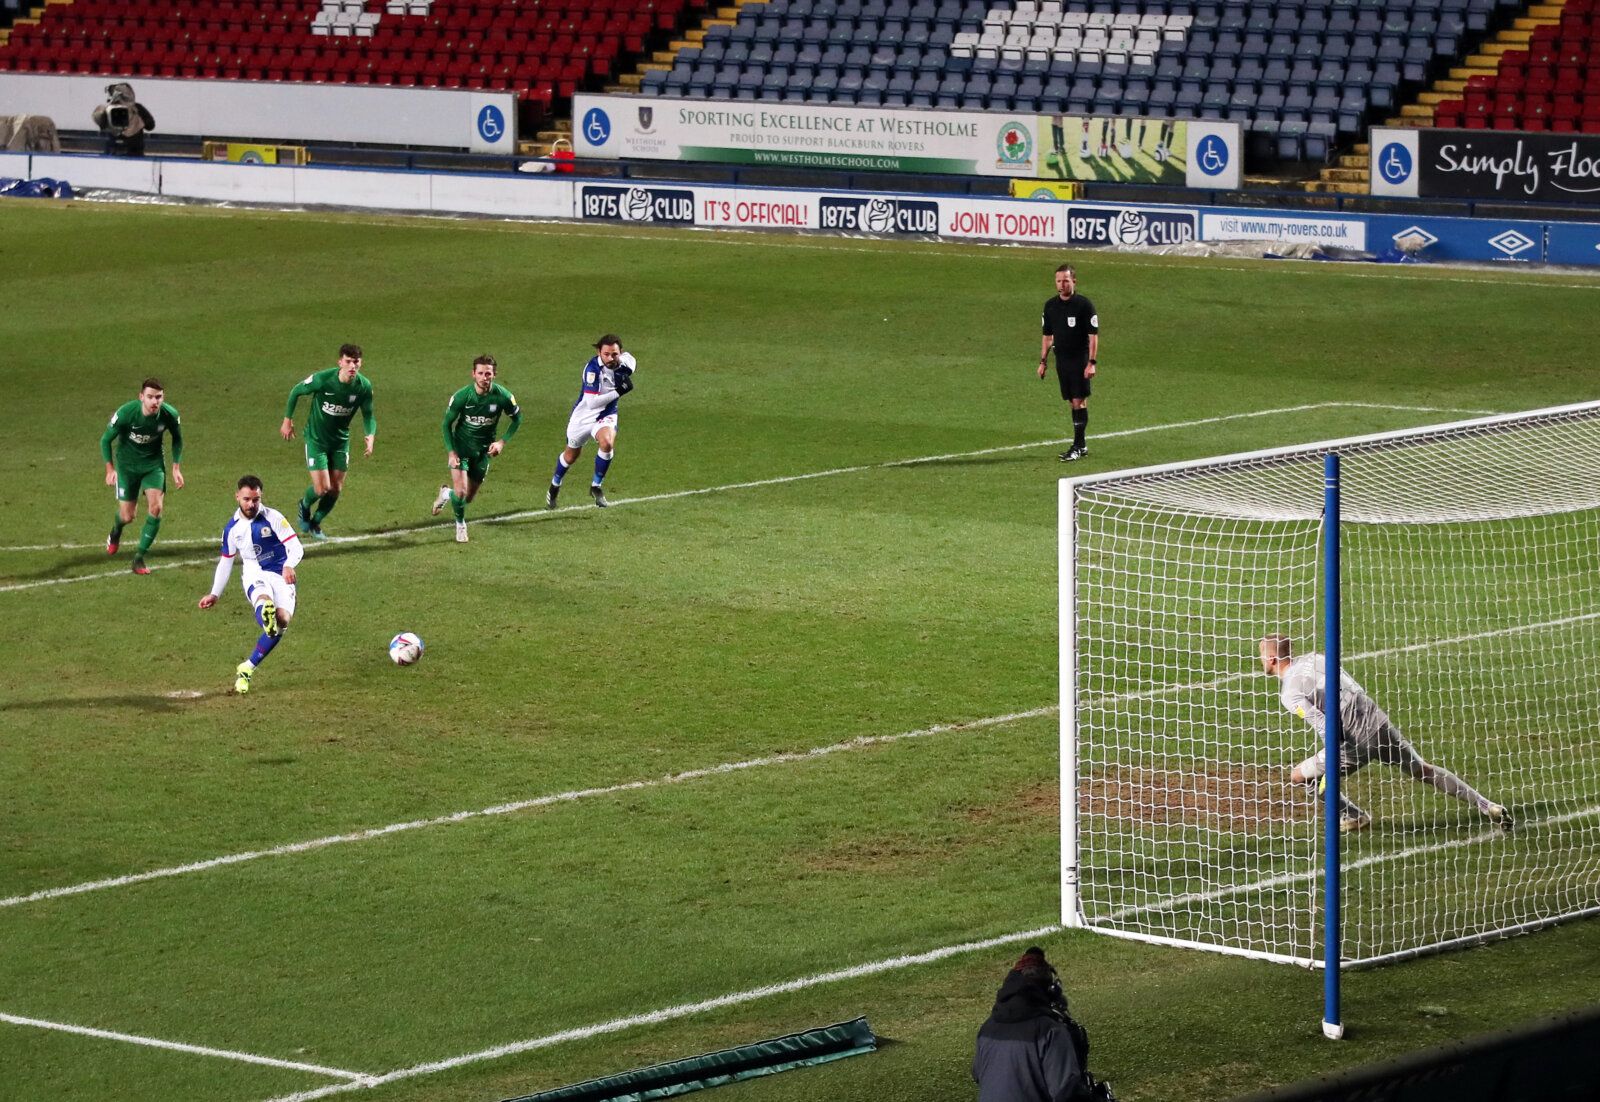 Soccer Football - Championship - Blackburn Rovers v Preston North End - Ewood Park, Blackburn, Britain - February 12, 2021 Blackburn Rovers' Adam Armstrong scores their first goal from the penalty spot Action Images/Molly Darlington EDITORIAL USE ONLY. No use with unauthorized audio, video, data, fixture lists, club/league logos or 'live' services. Online in-match use limited to 75 images, no video emulation. No use in betting, games or single club /league/player publications.  Please contact yo